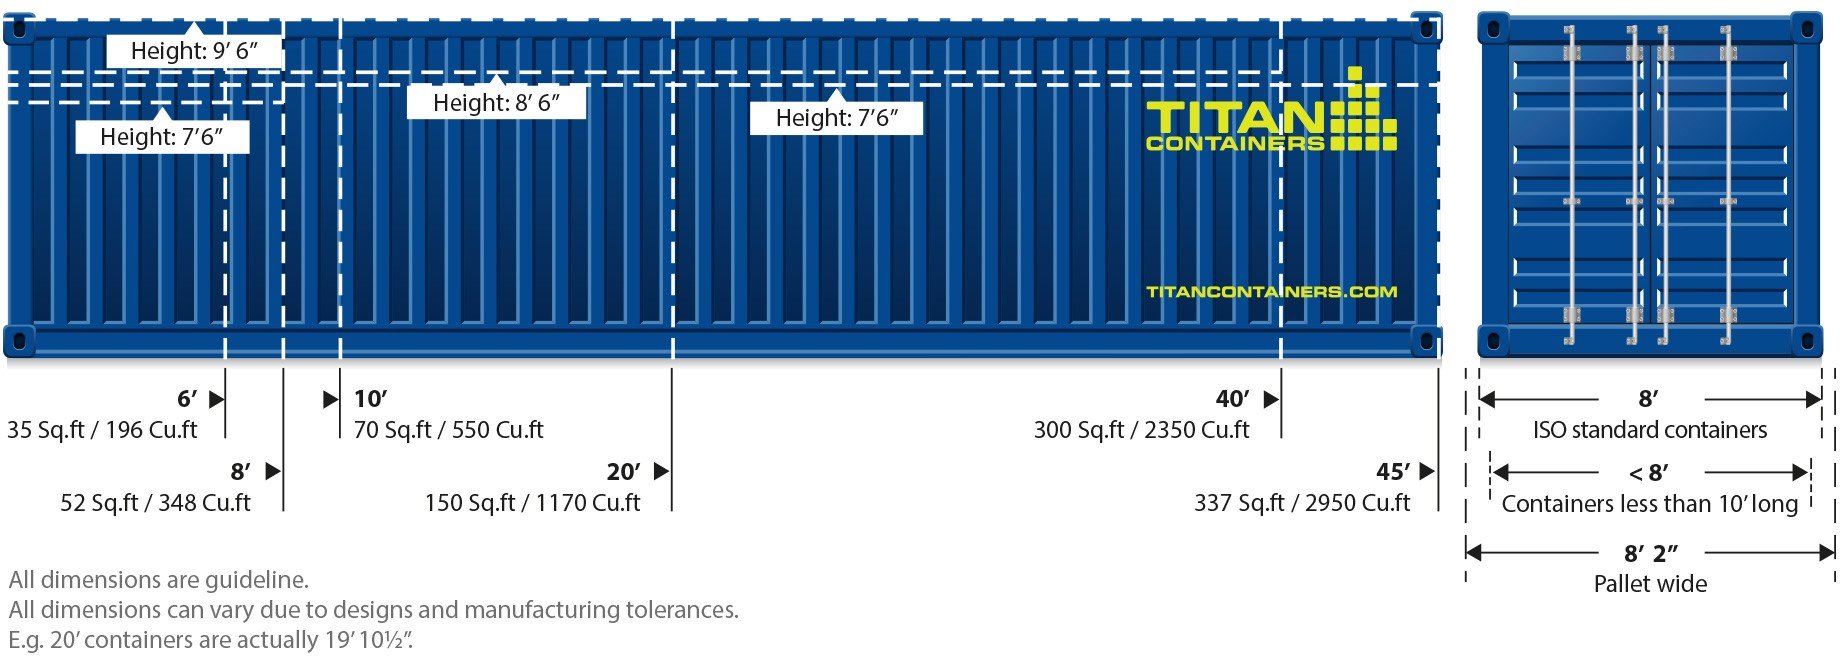 CONTAINER DIMENSIONS GUIDE TITAN CONTAINERS 6 8 10 20 40 FOOT